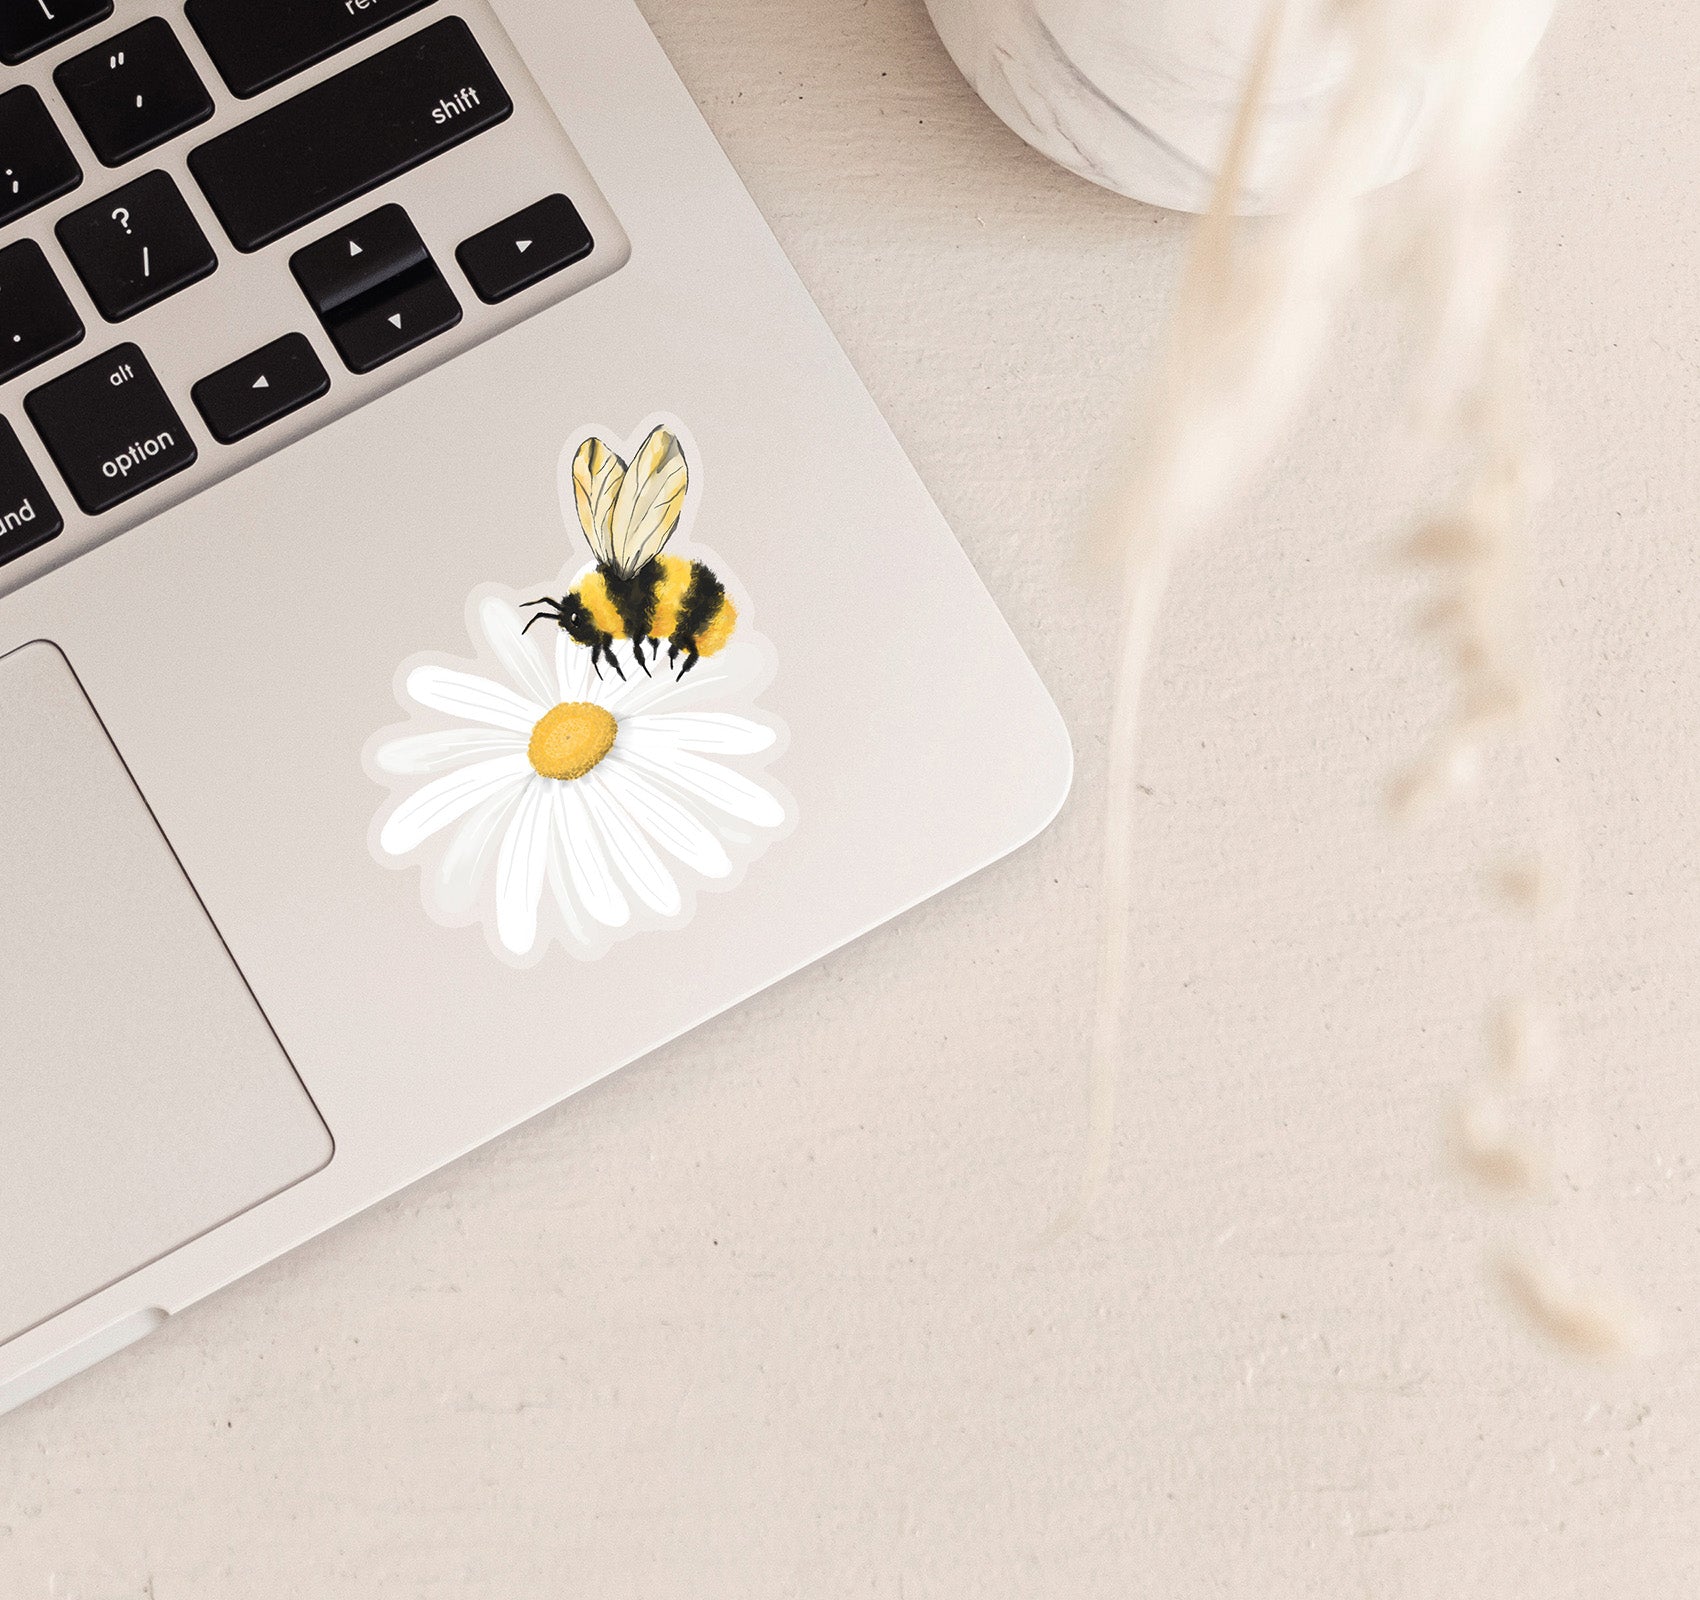 Bumble bee on a daisy flower laptop sticker